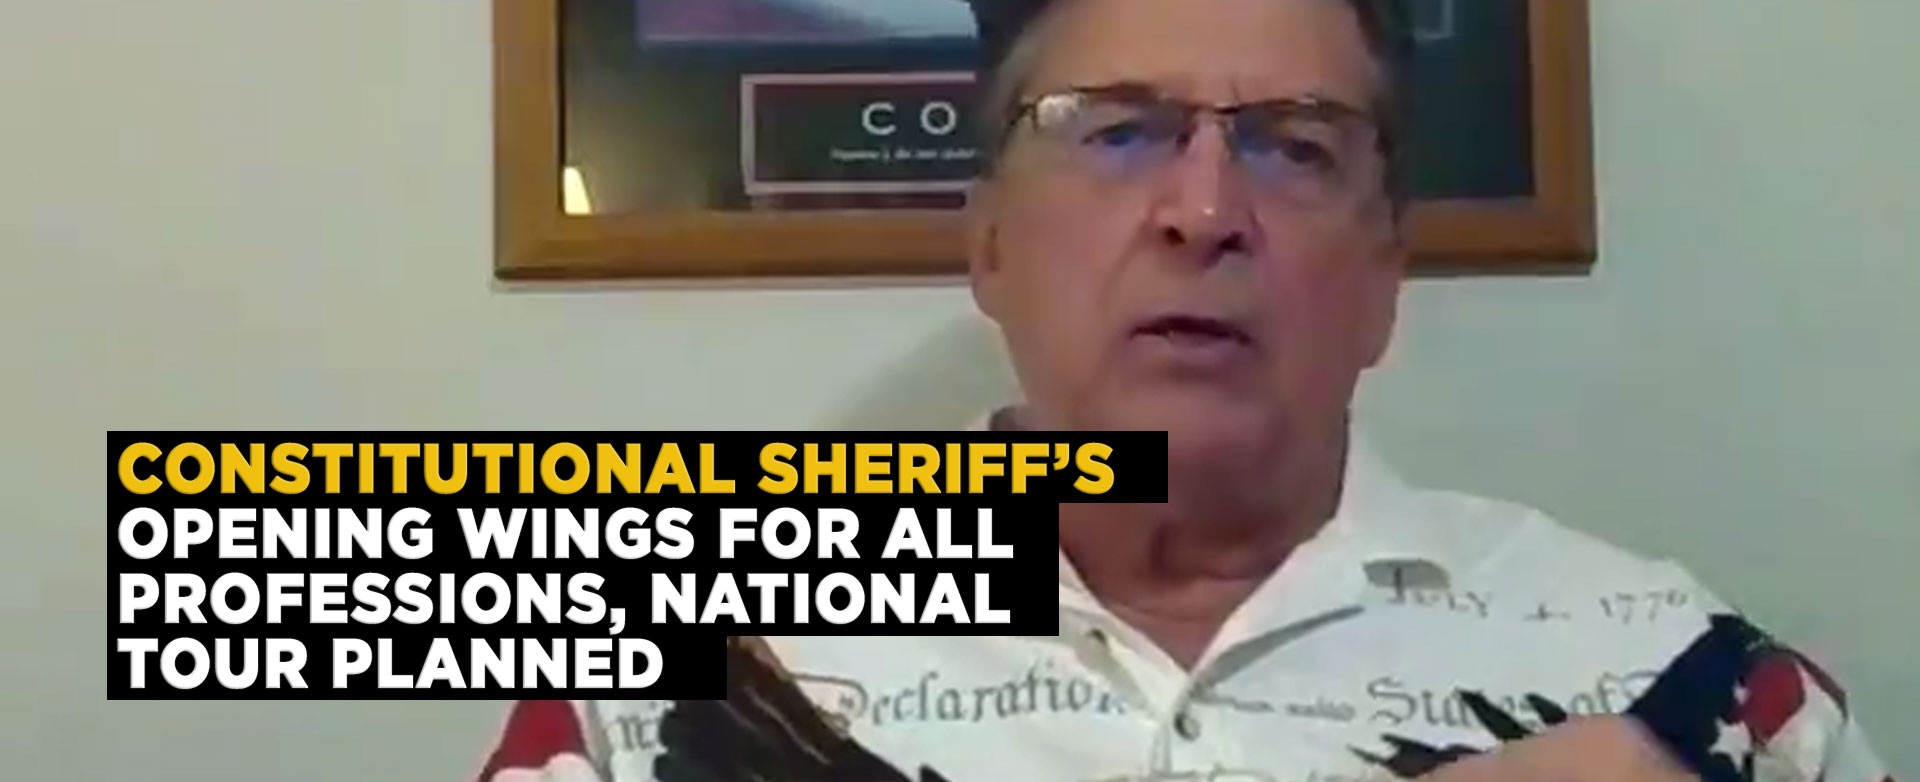 MyPatriotsNetwork-Constitutional Sheriff's Opening Wings For All Professions, National Tour Planned